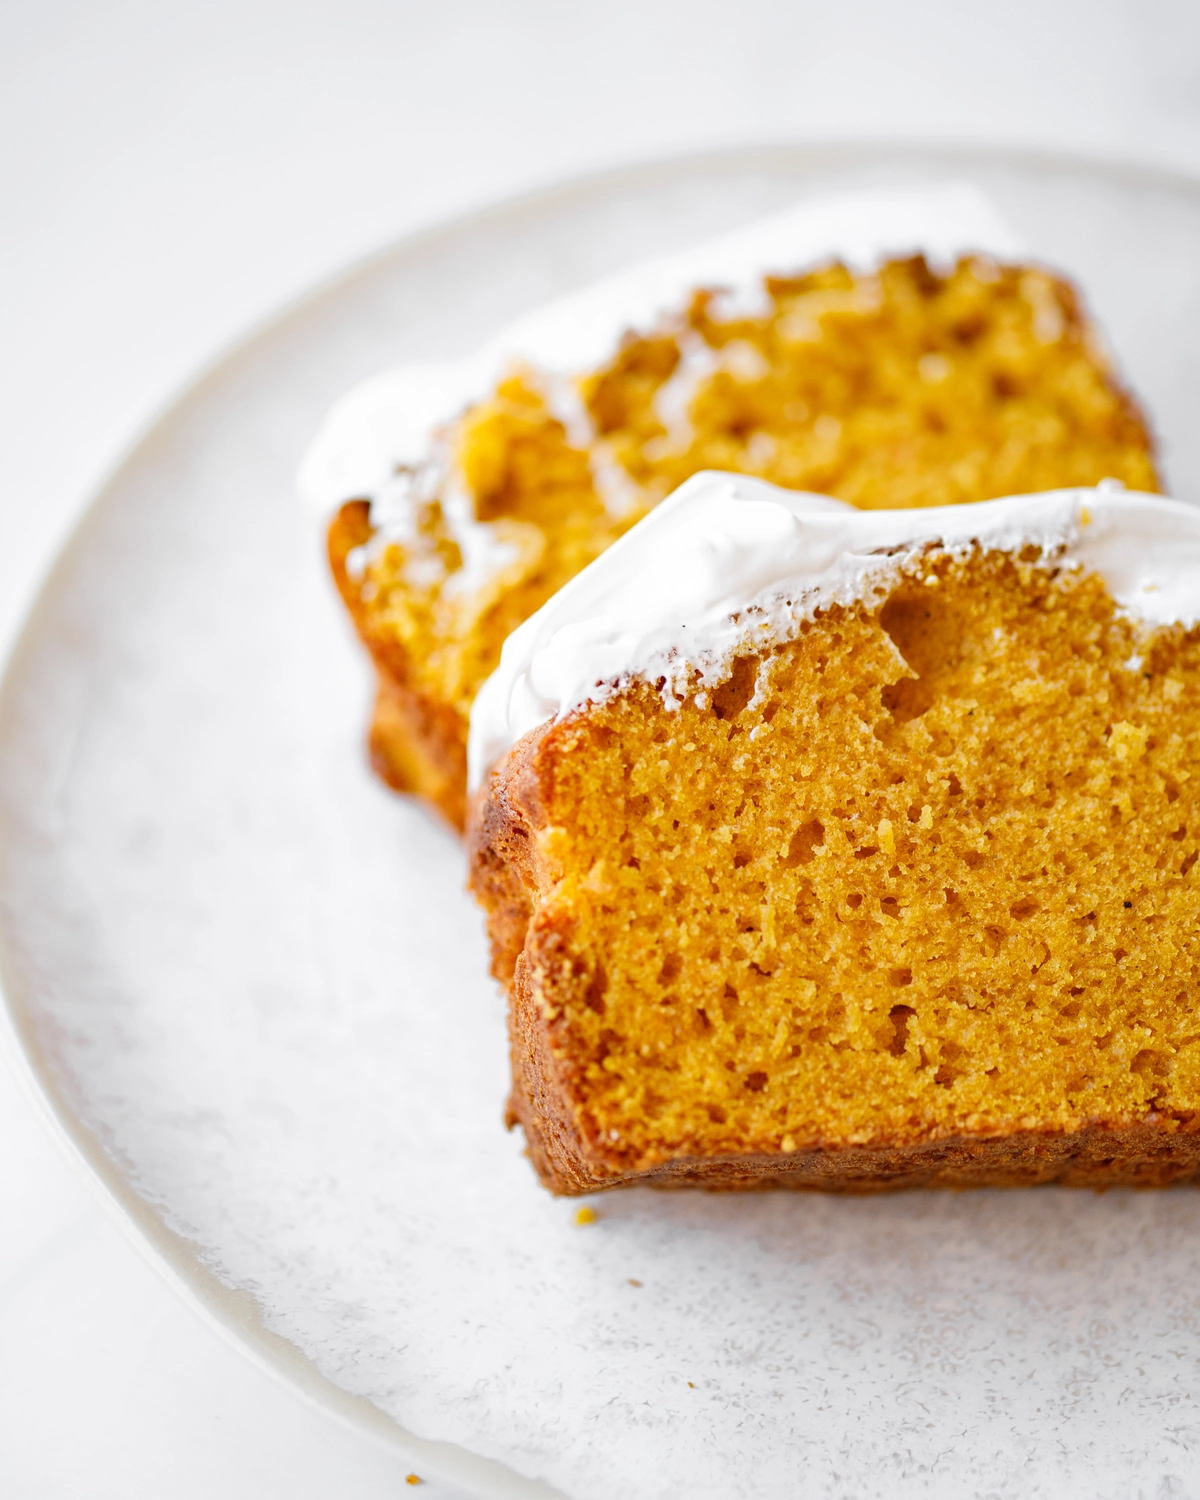 Pumpkin bread. There are 2 slices of pumpkin bread on the plate. Its delicate texture and delightful orange color are visible.